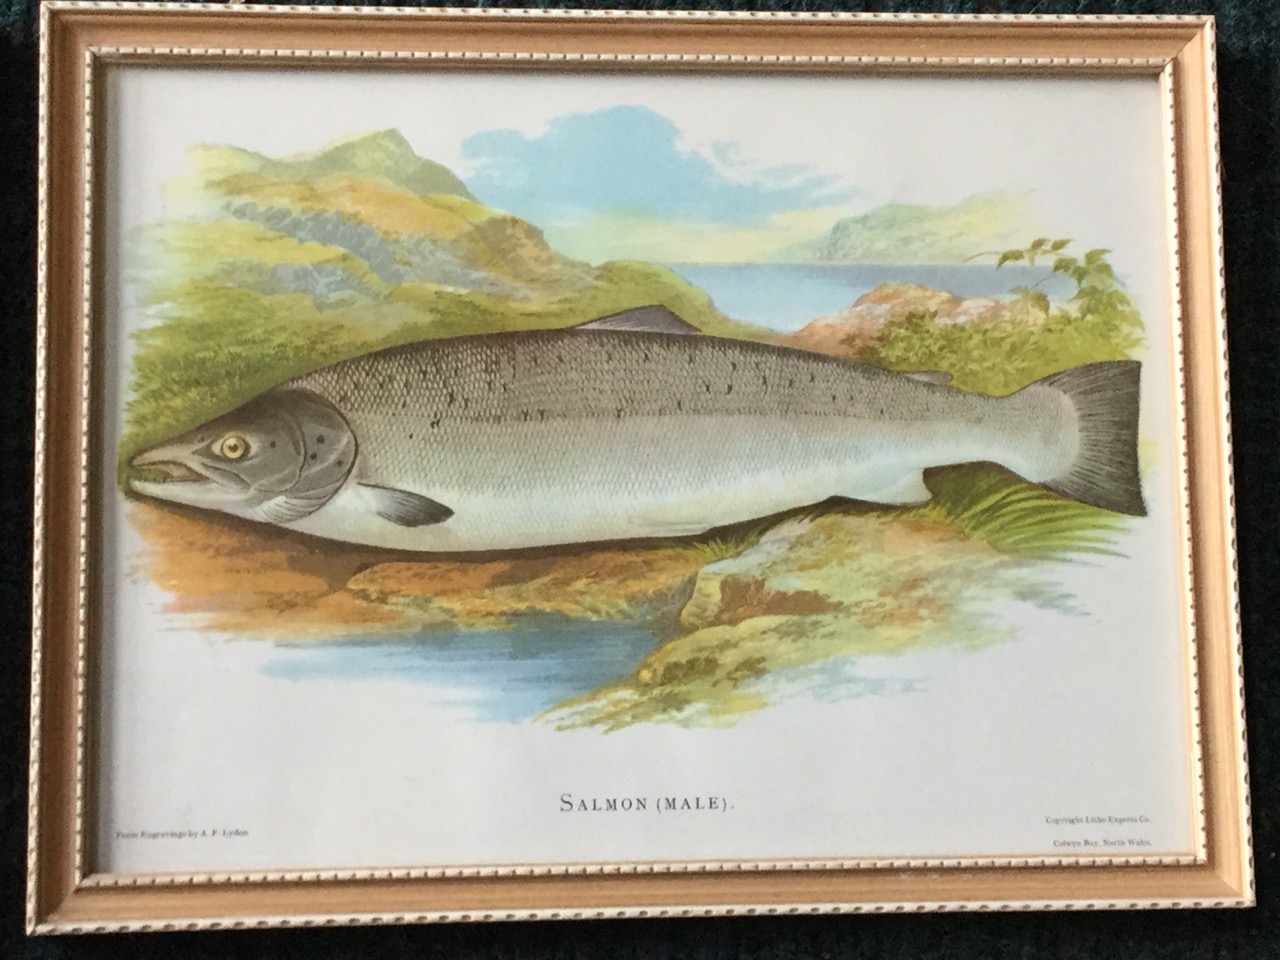 A set of four framed fish prints, Common Trout, Grisle, Galway Seatrout, and Salmon, the coloured - Image 6 of 6